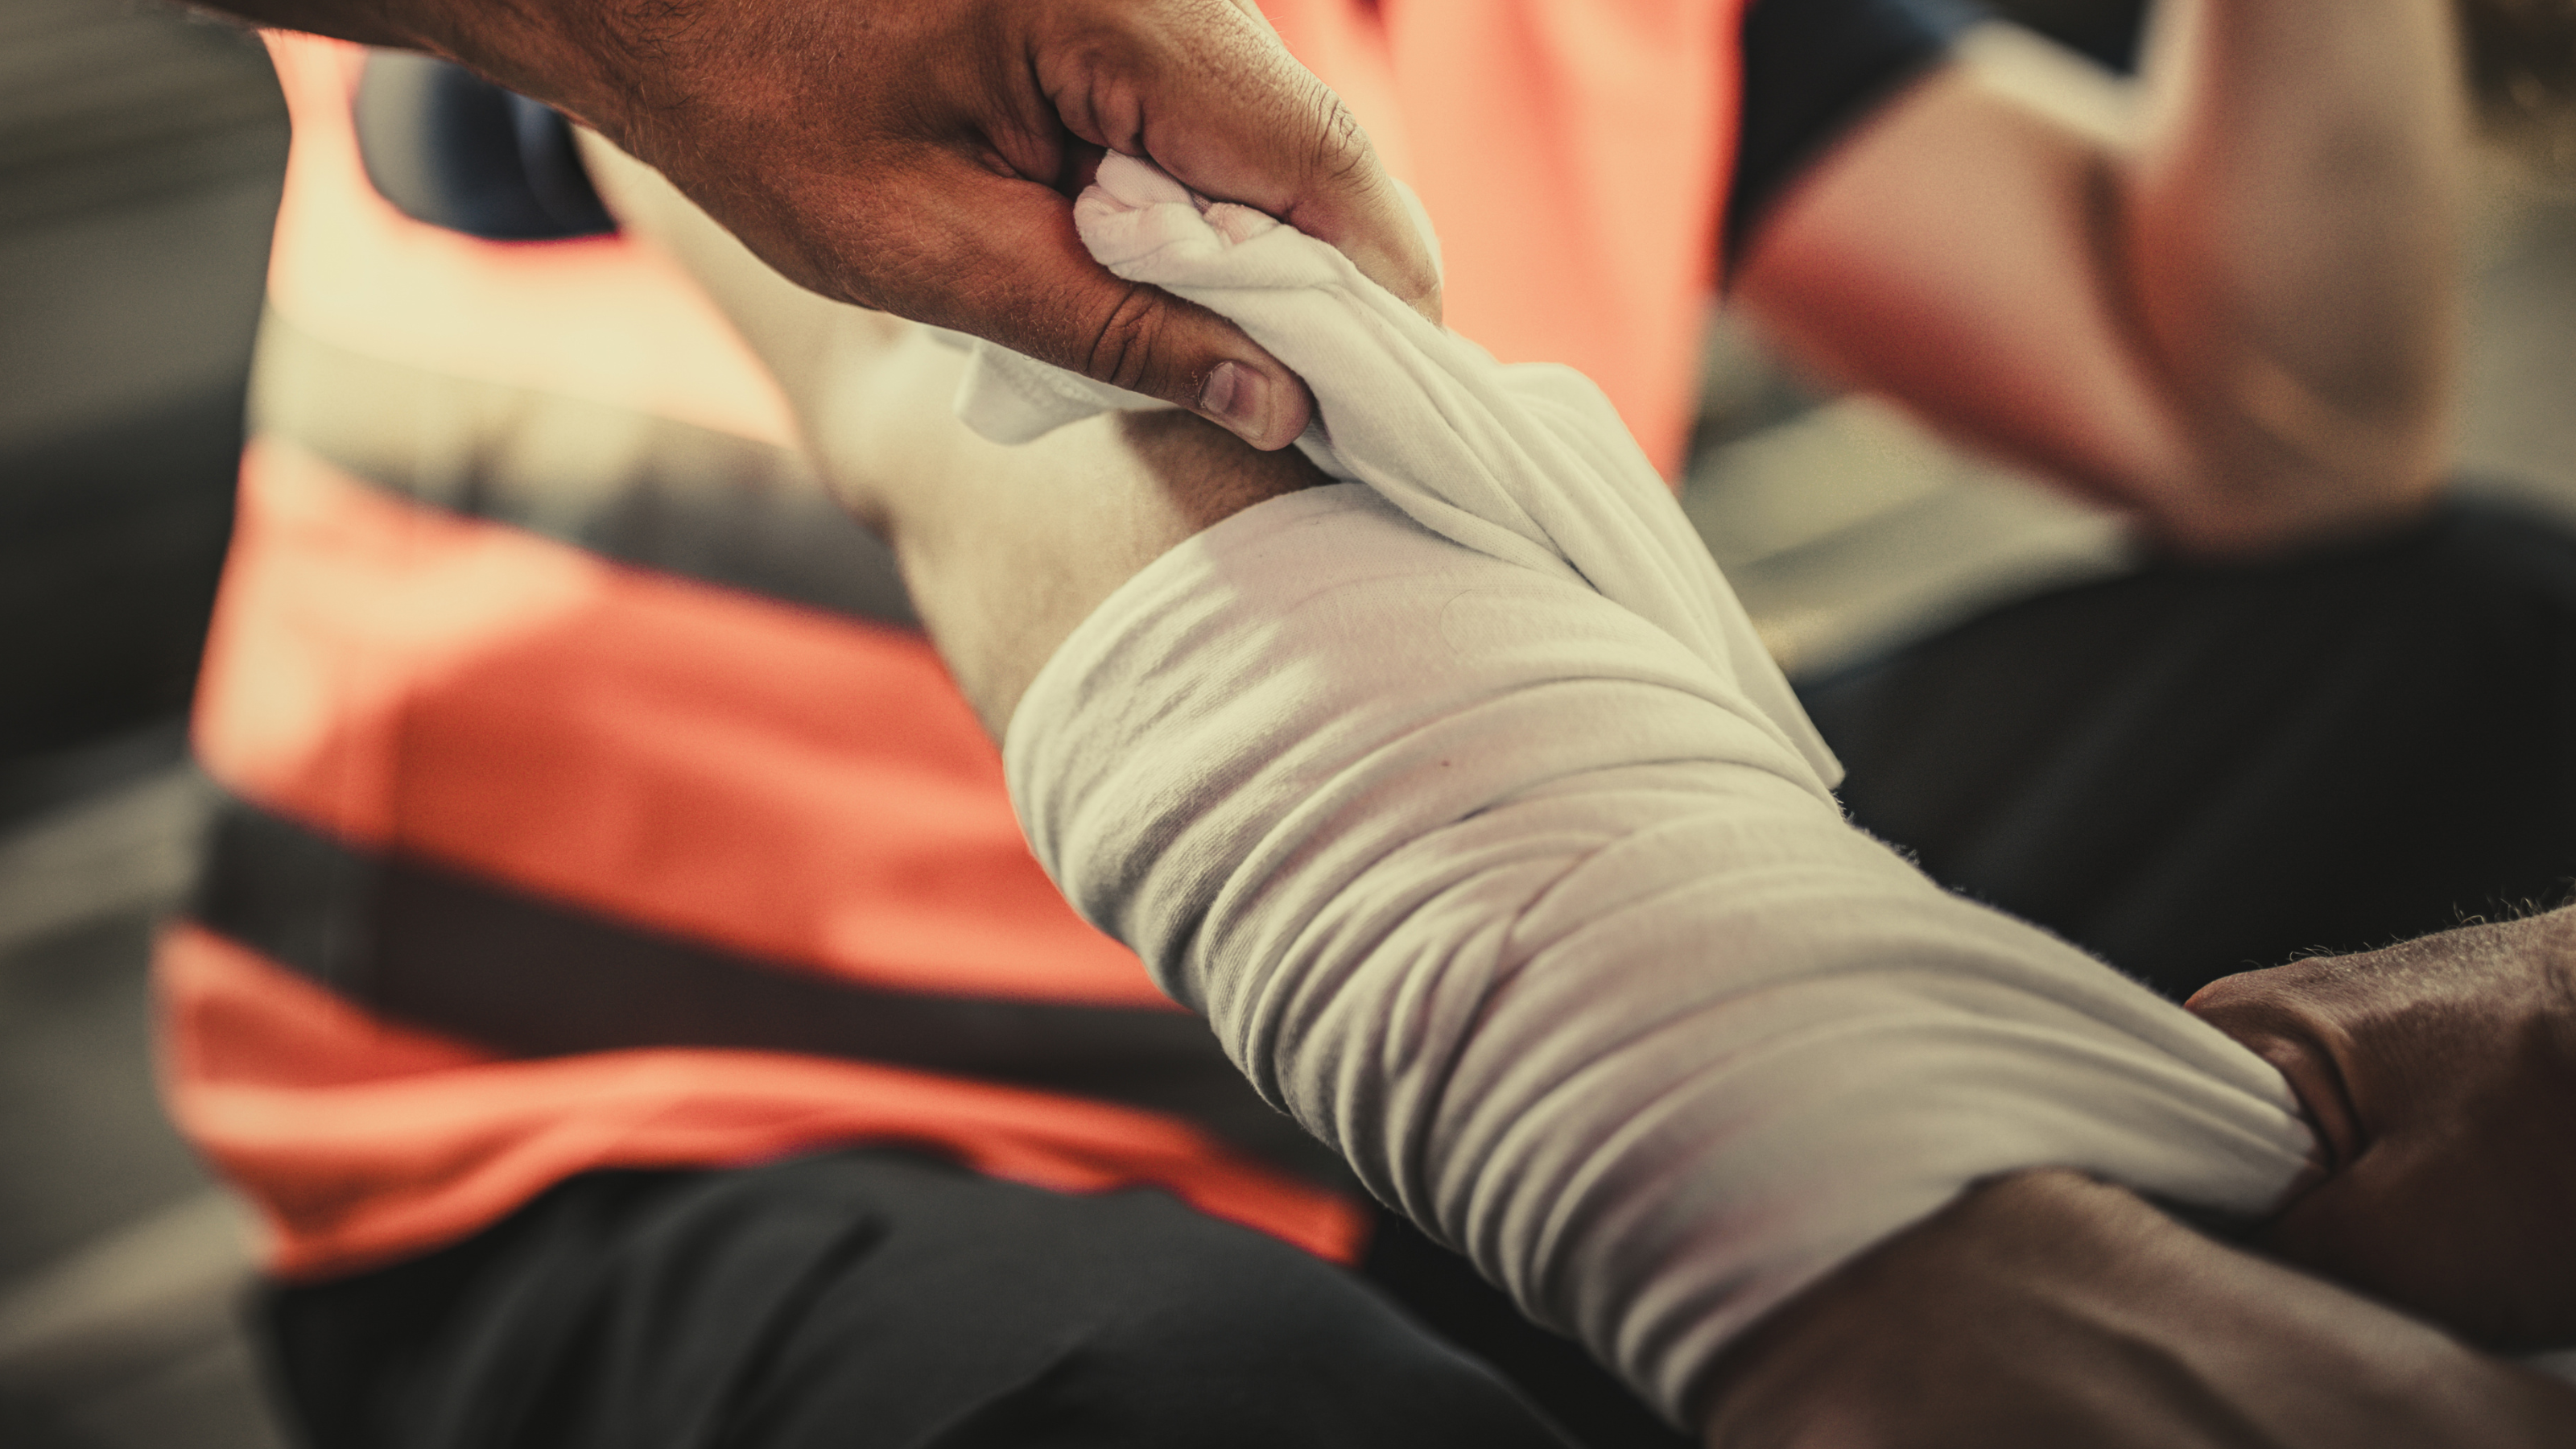 Warehouse Injury - Workers' Compensation